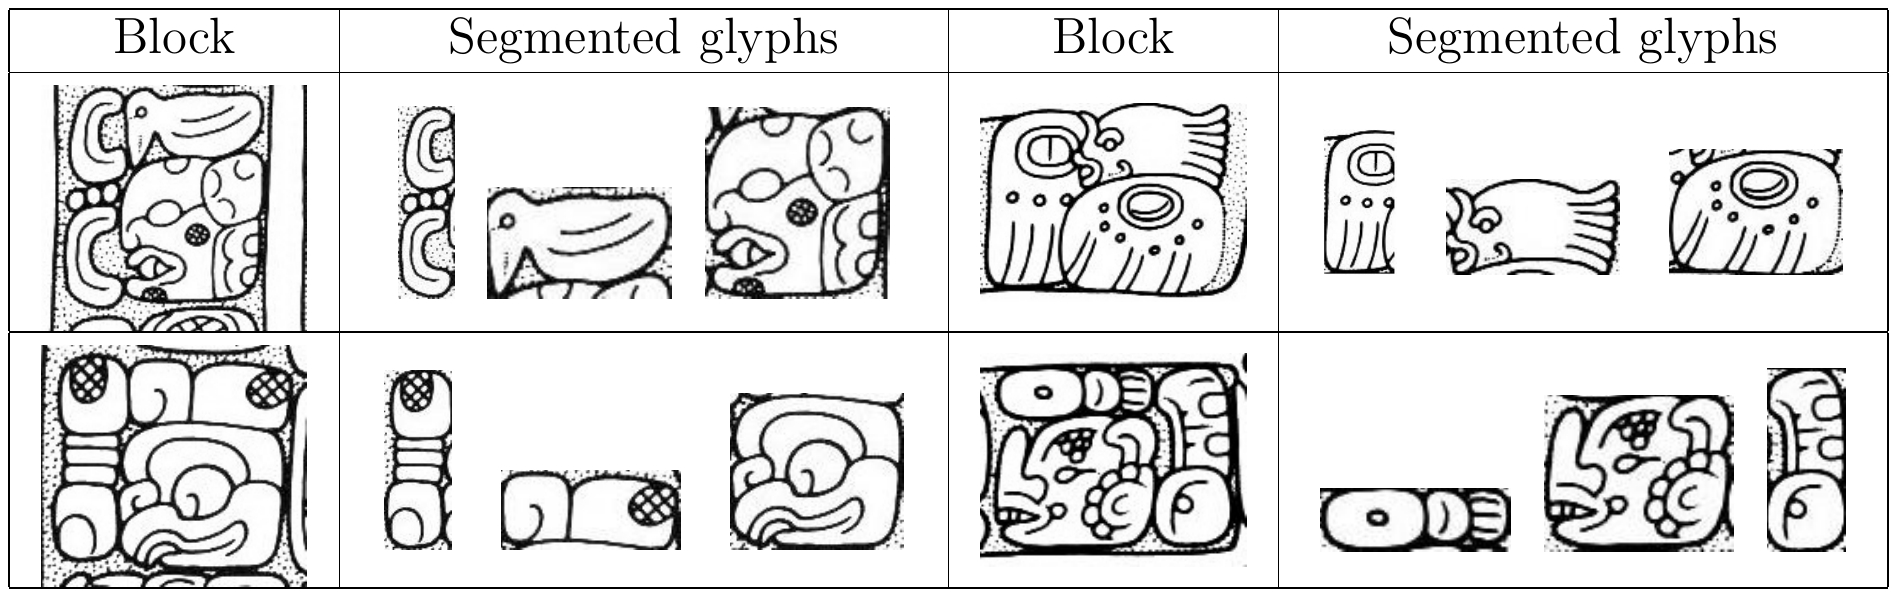 Figure 5. Example blocks and segmented glyph strings form the 'Monument' dataset.